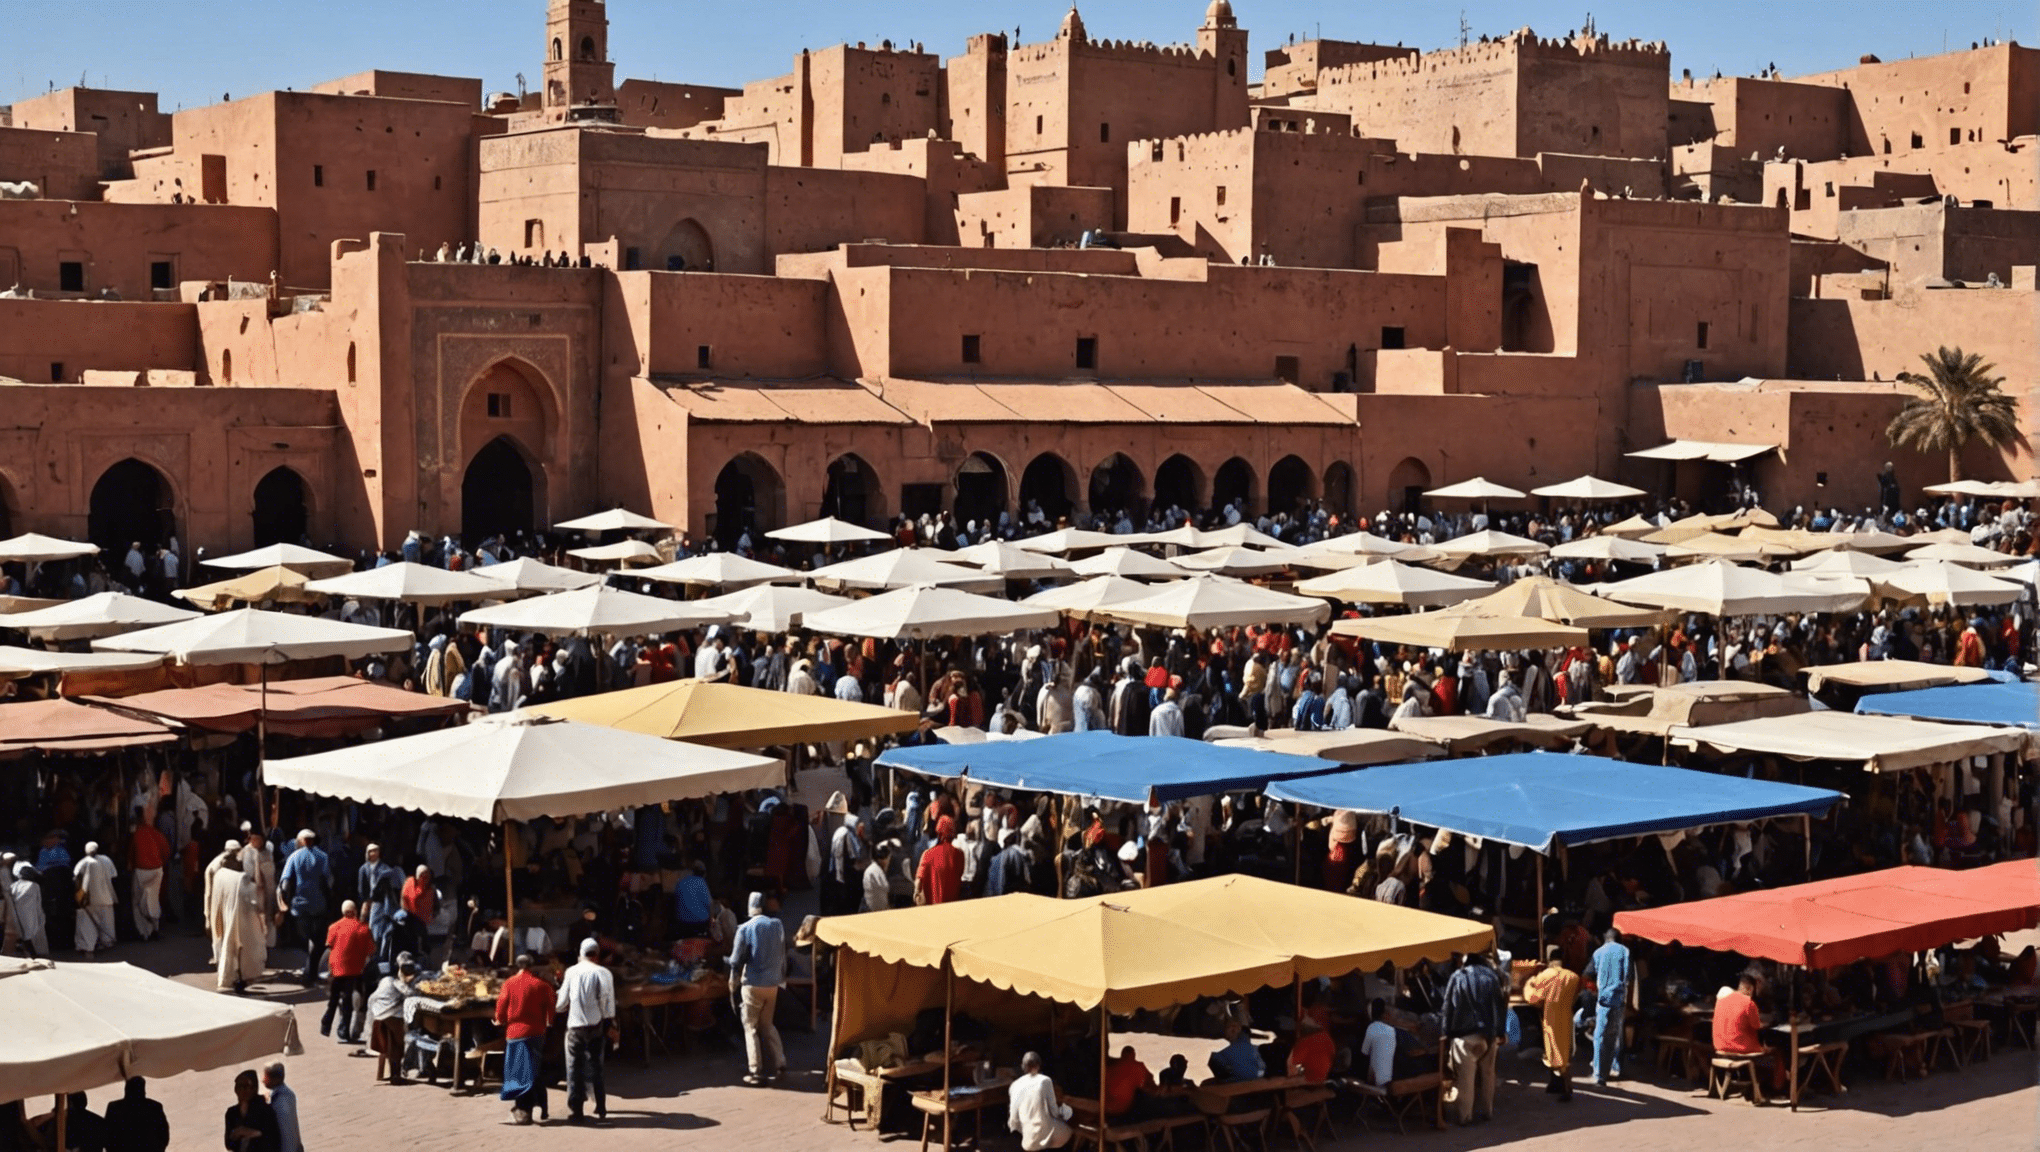 find out how hot marrakech gets in may with our comprehensive guide. plan your trip with confidence and enjoy the perfect weather in this stunning city.